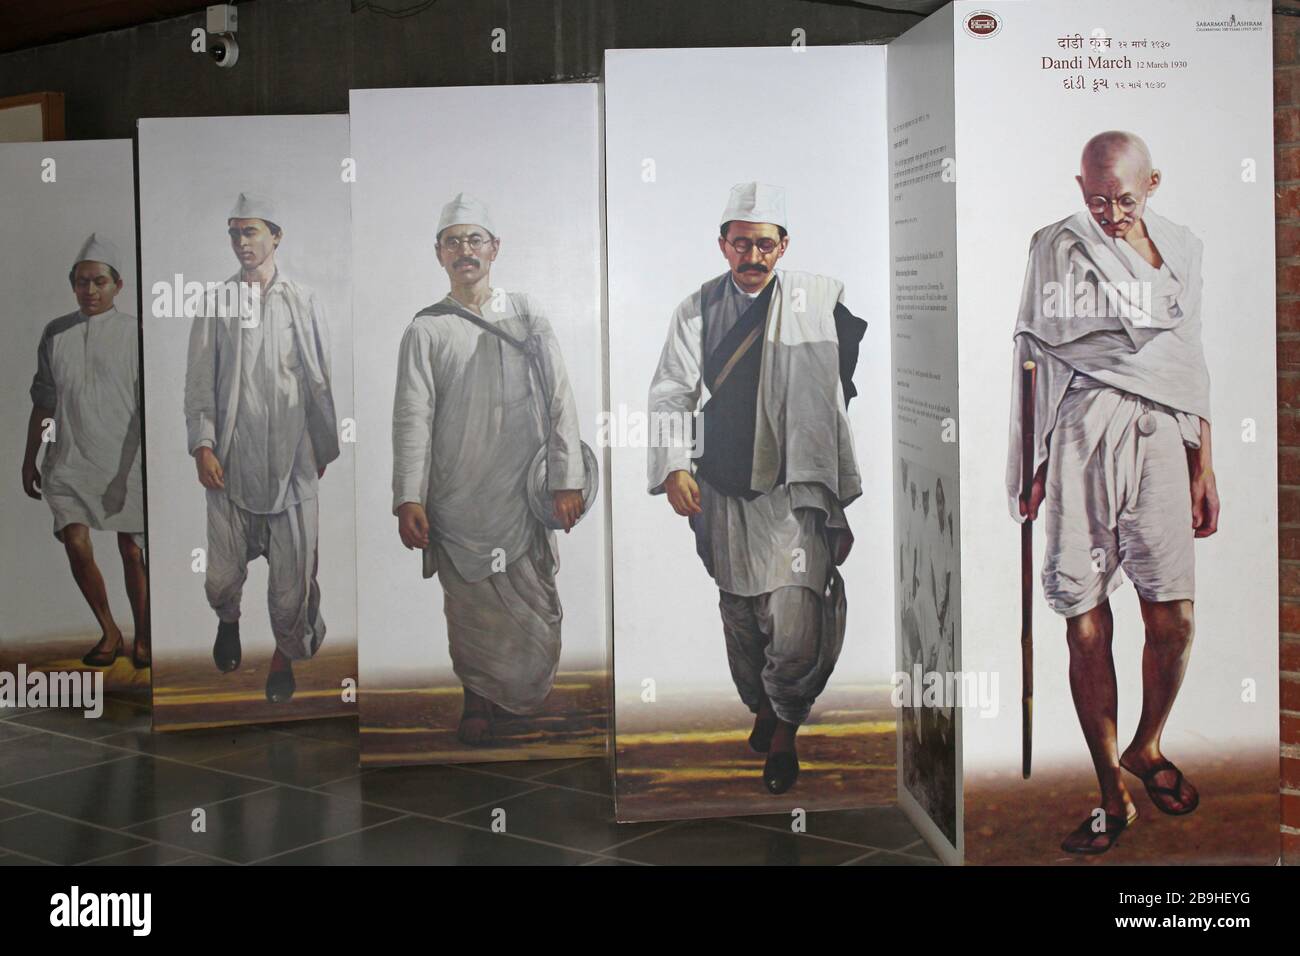 Display on Salt March a.k.a. Dandi March, nonviolent protest action in India led by Mahatma Gandhi Stock Photo